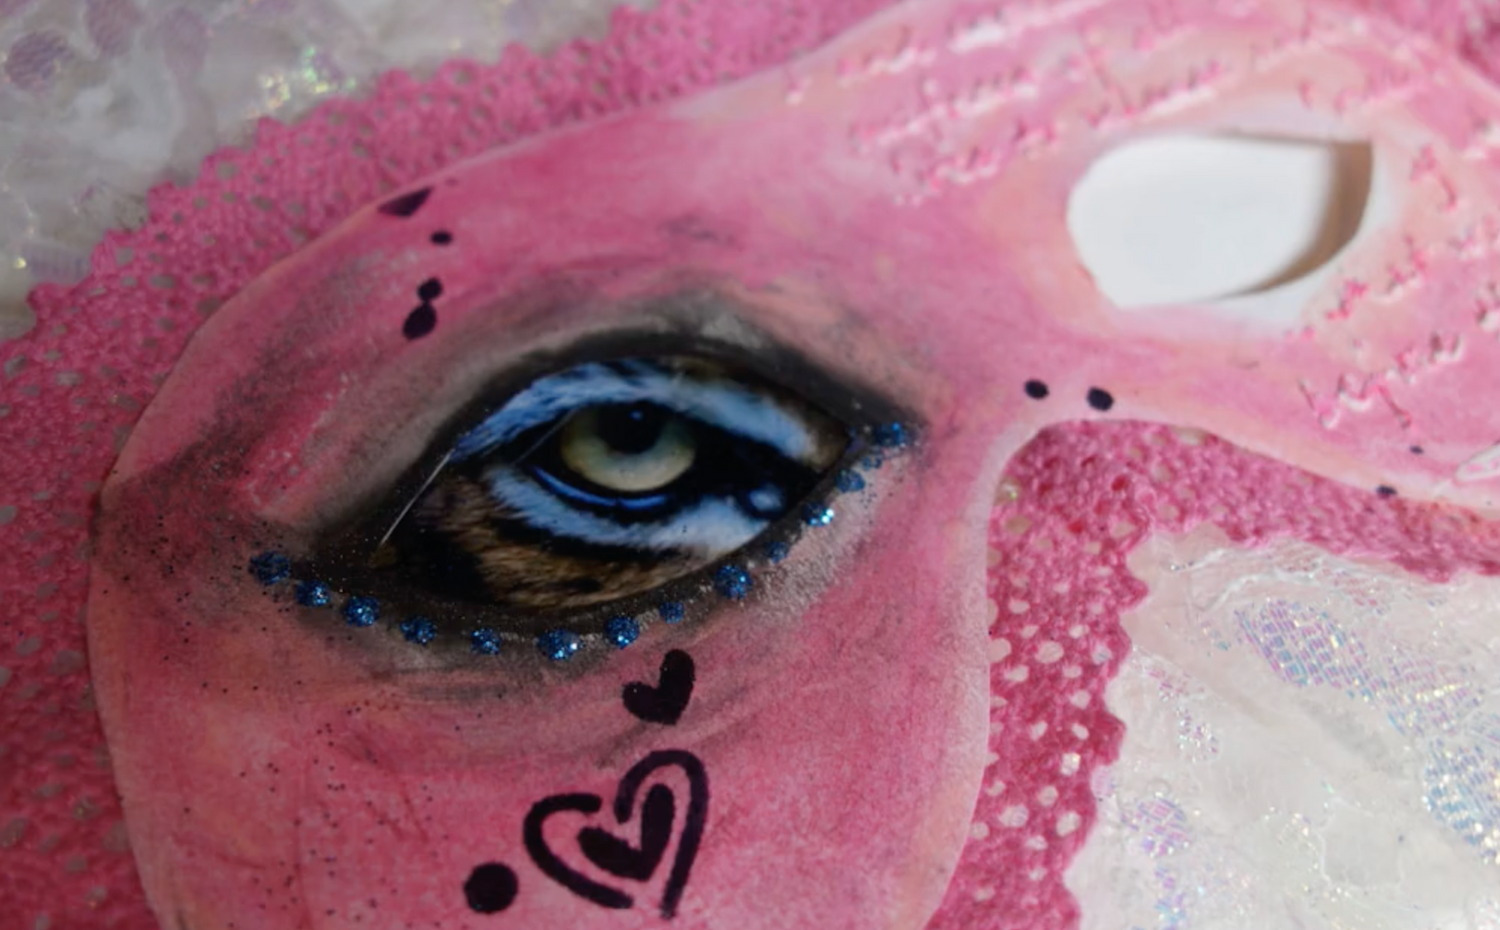 Abstract art image of a pink eye mask with one eye painted. This image was created by a student of art therapy now for the course how to use art therapy with others.